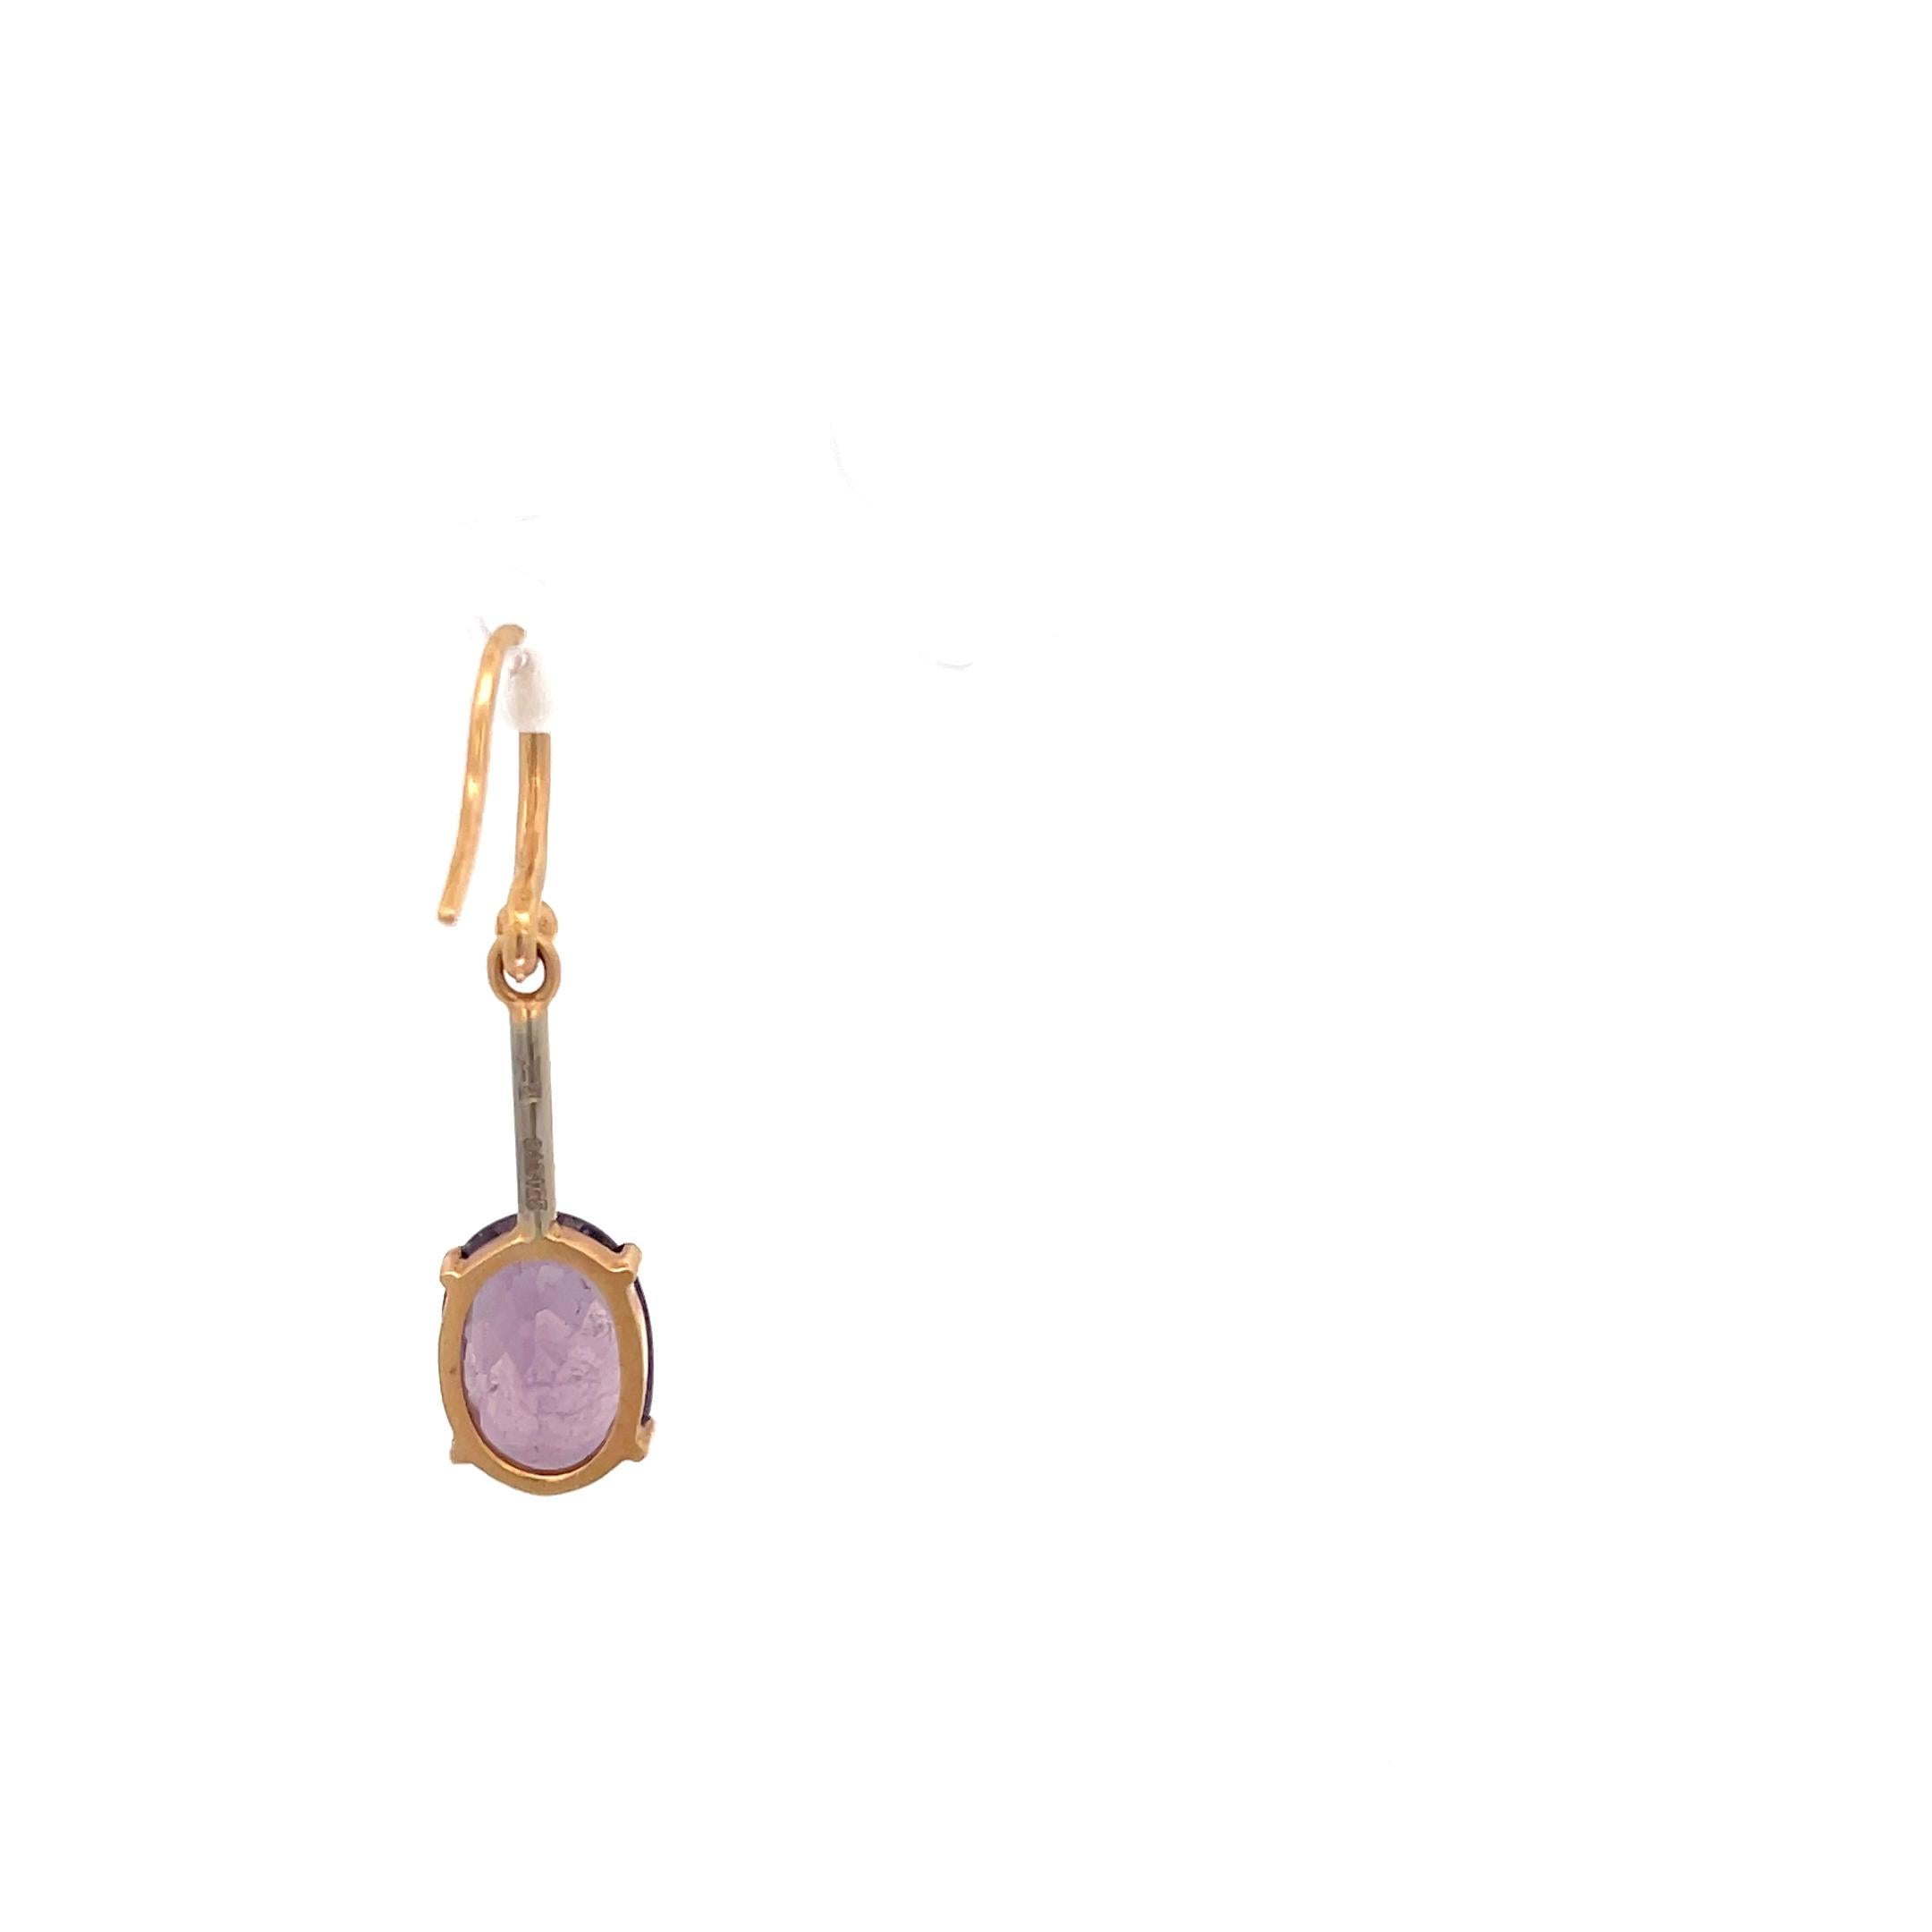 Irene Neuwirth Diamond and Purple Tourmaline Single Earring 18K Rose Gold In Excellent Condition For Sale In Dallas, TX